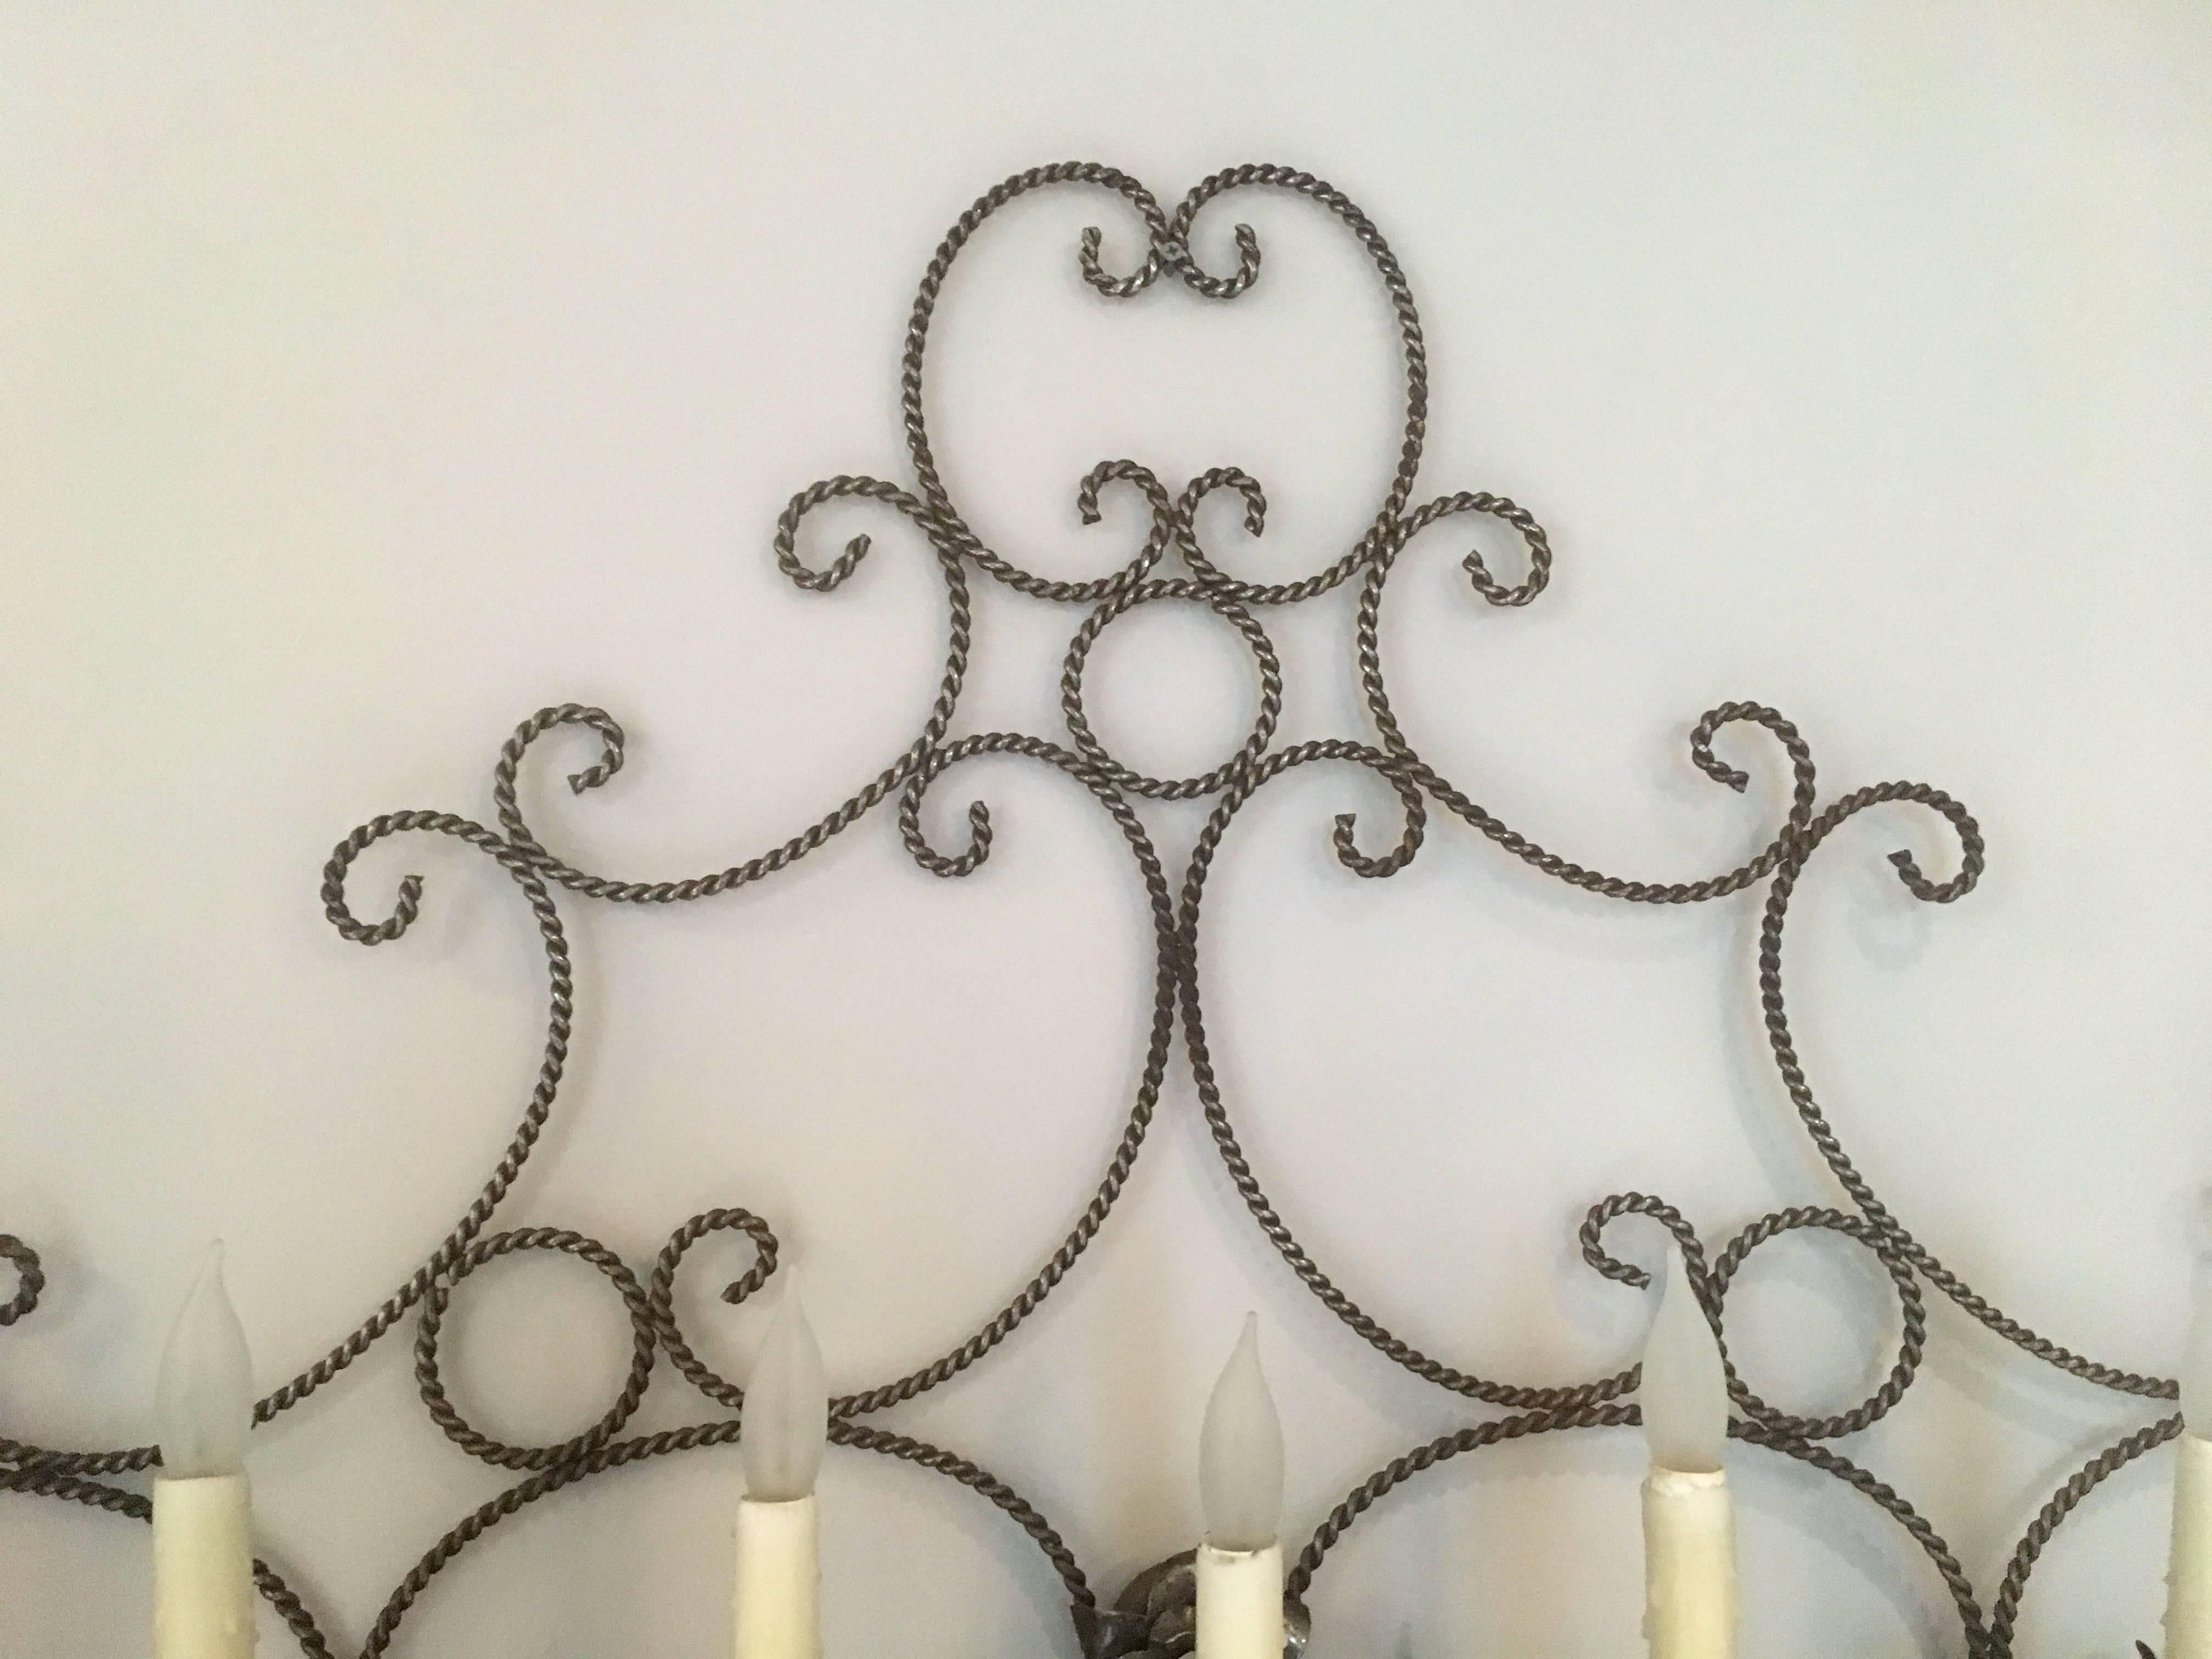 Long French Steel Six-Light Wall Sconce with Tassels and Glass Beads In Good Condition For Sale In Woodbury, CT